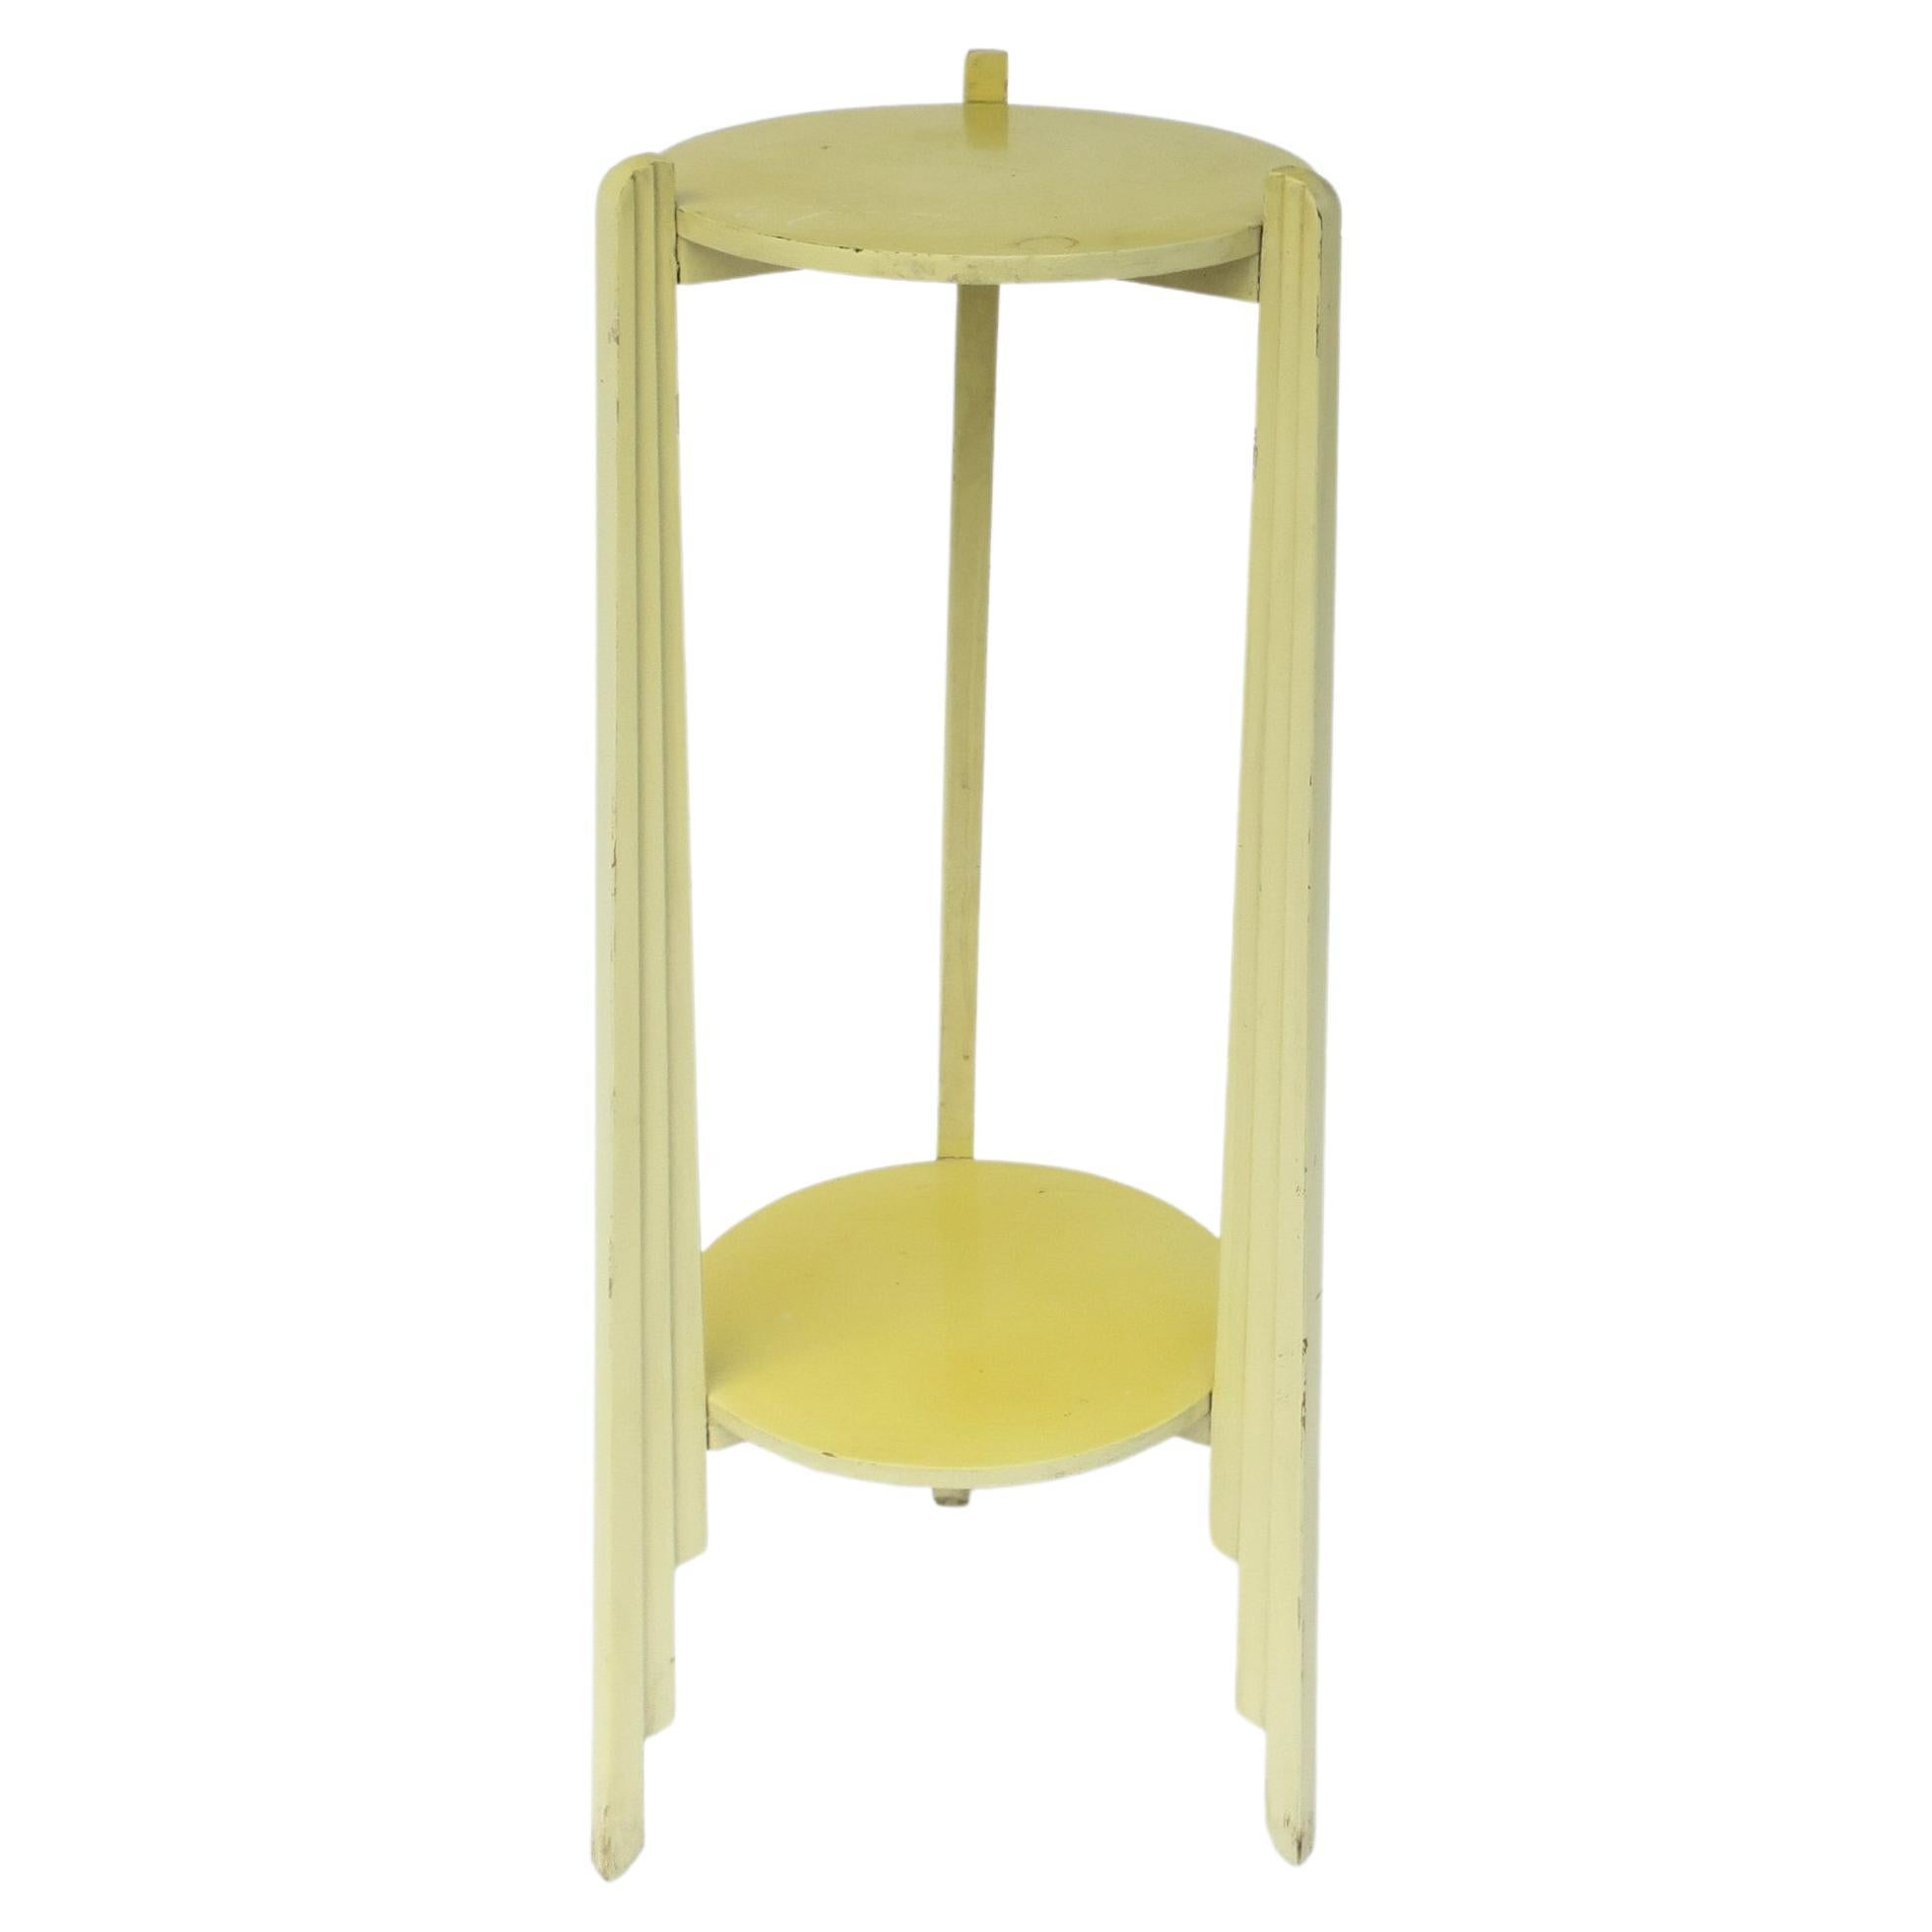 Yellow Art Deco Column Pillar Pedestal Stand with Lower Shelf, 1 of 2 Available For Sale